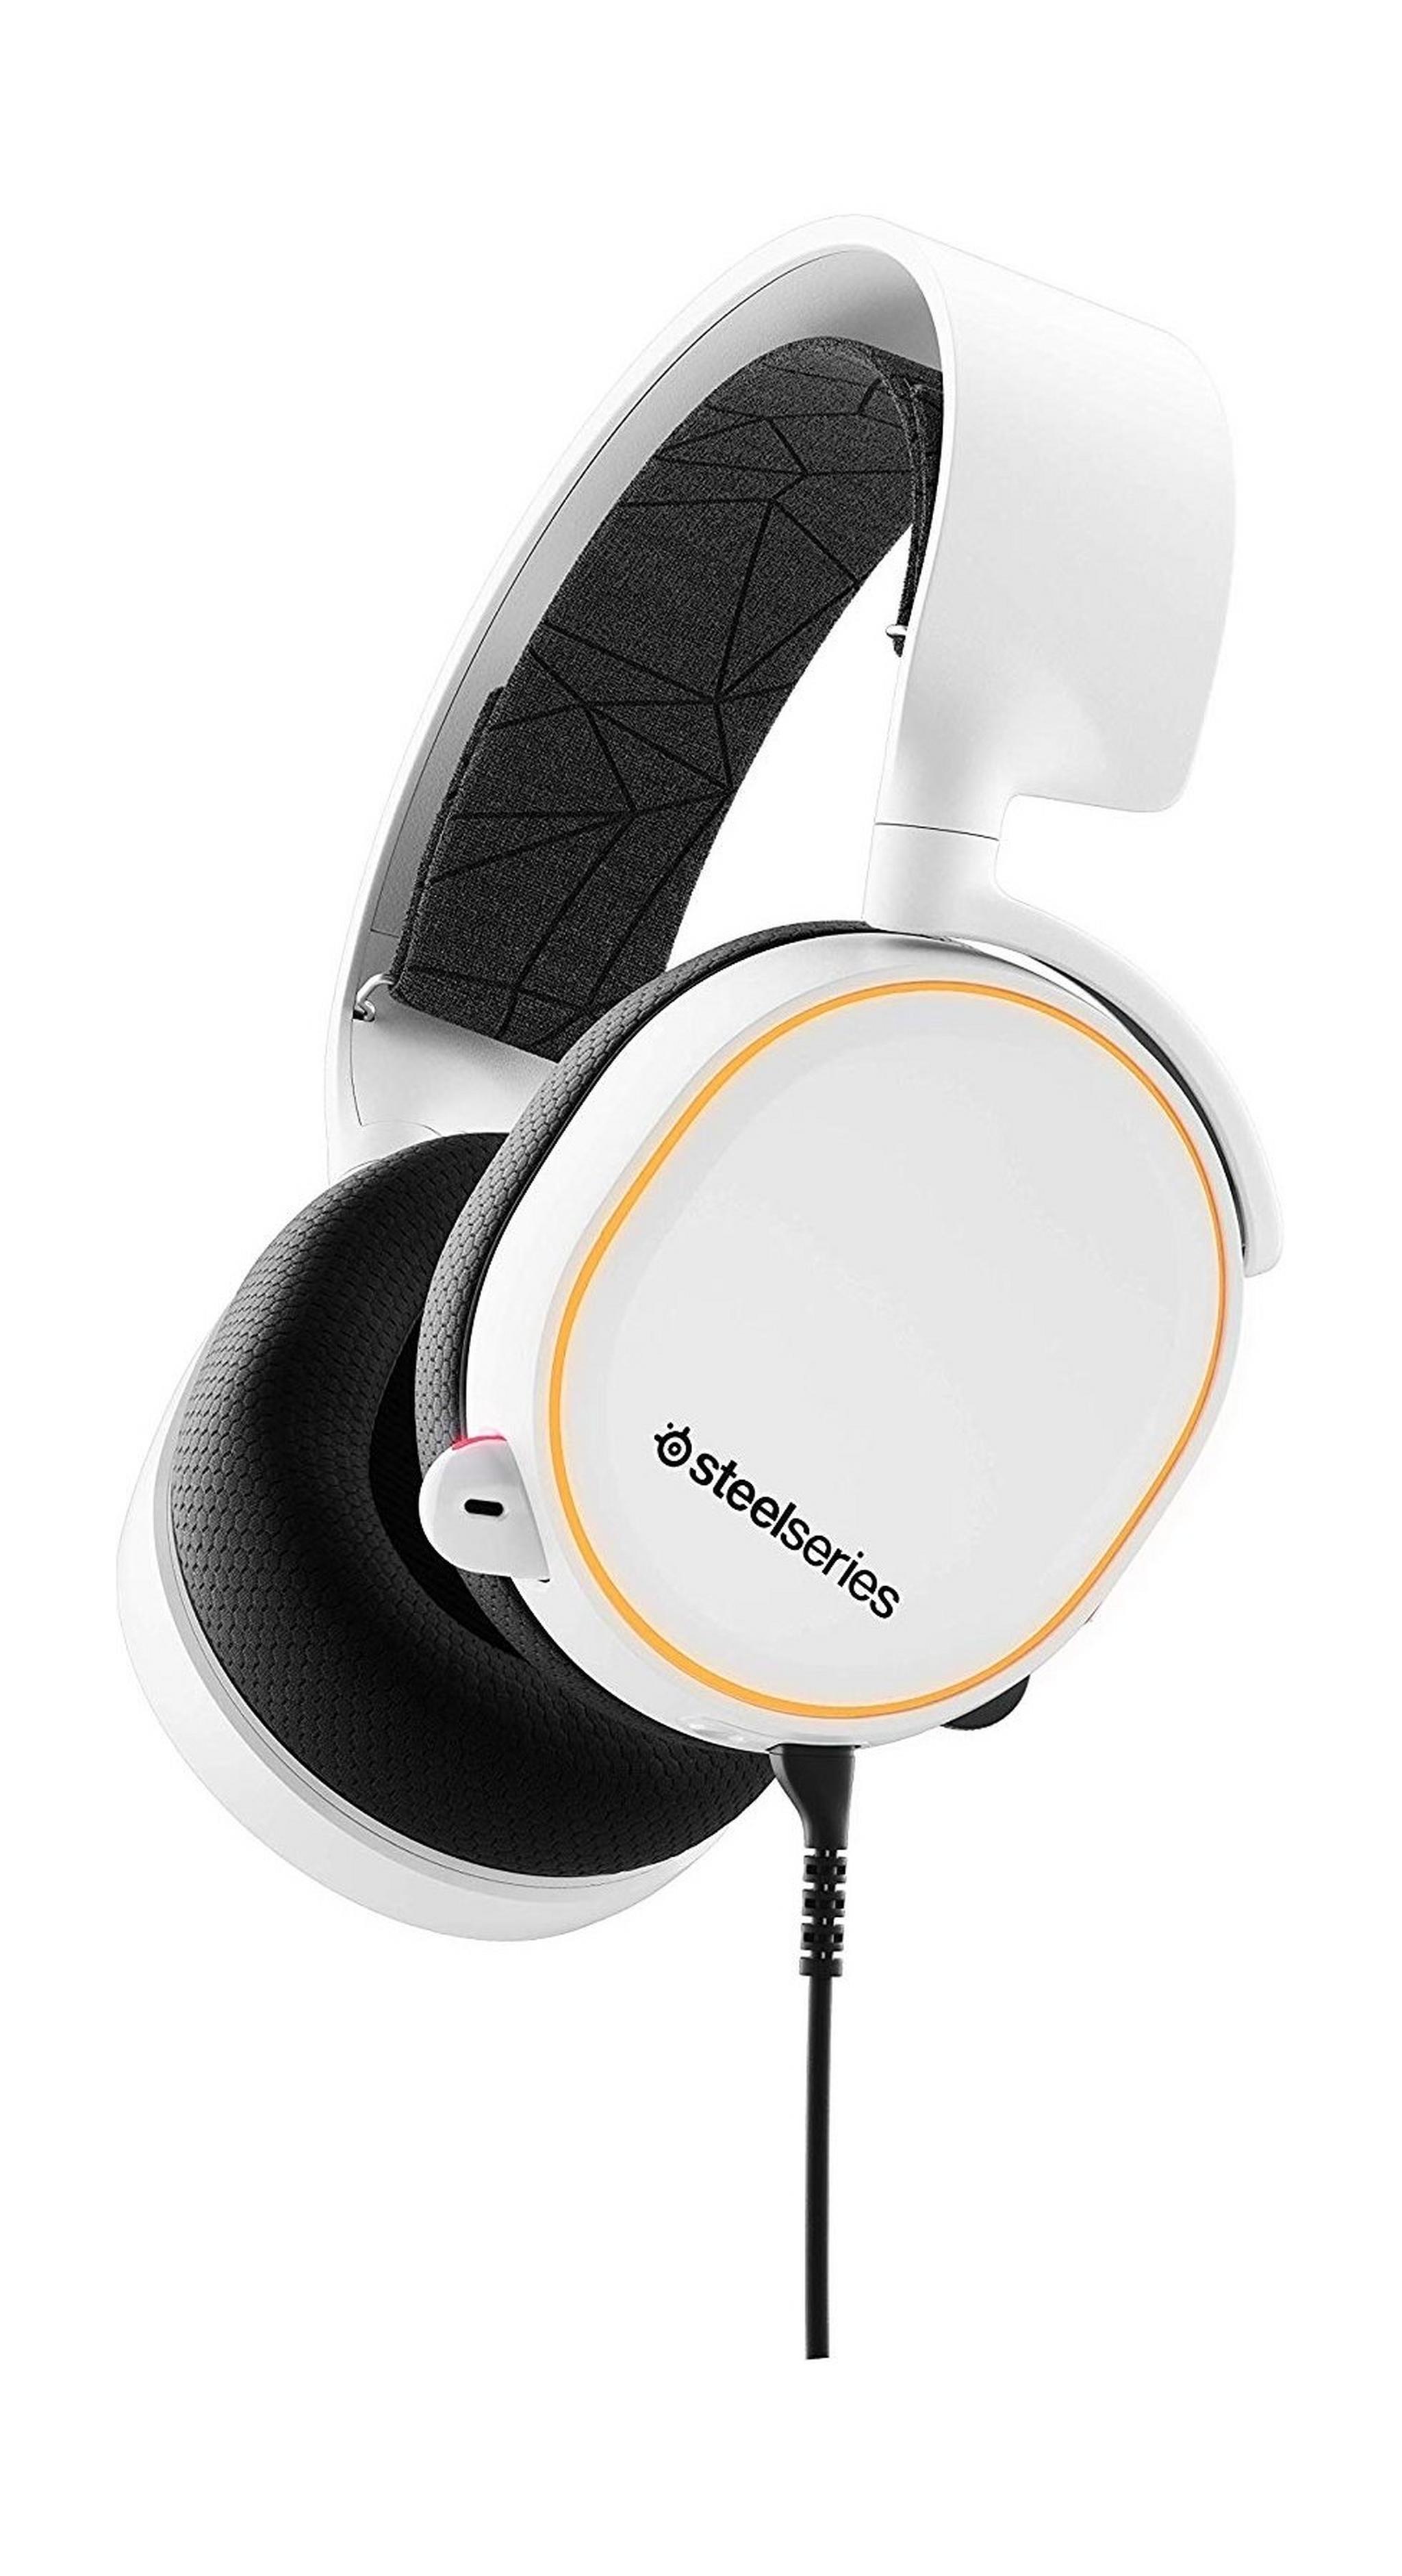 Steelseries Arctis 5 Gaming Headset 2019 Edition - White